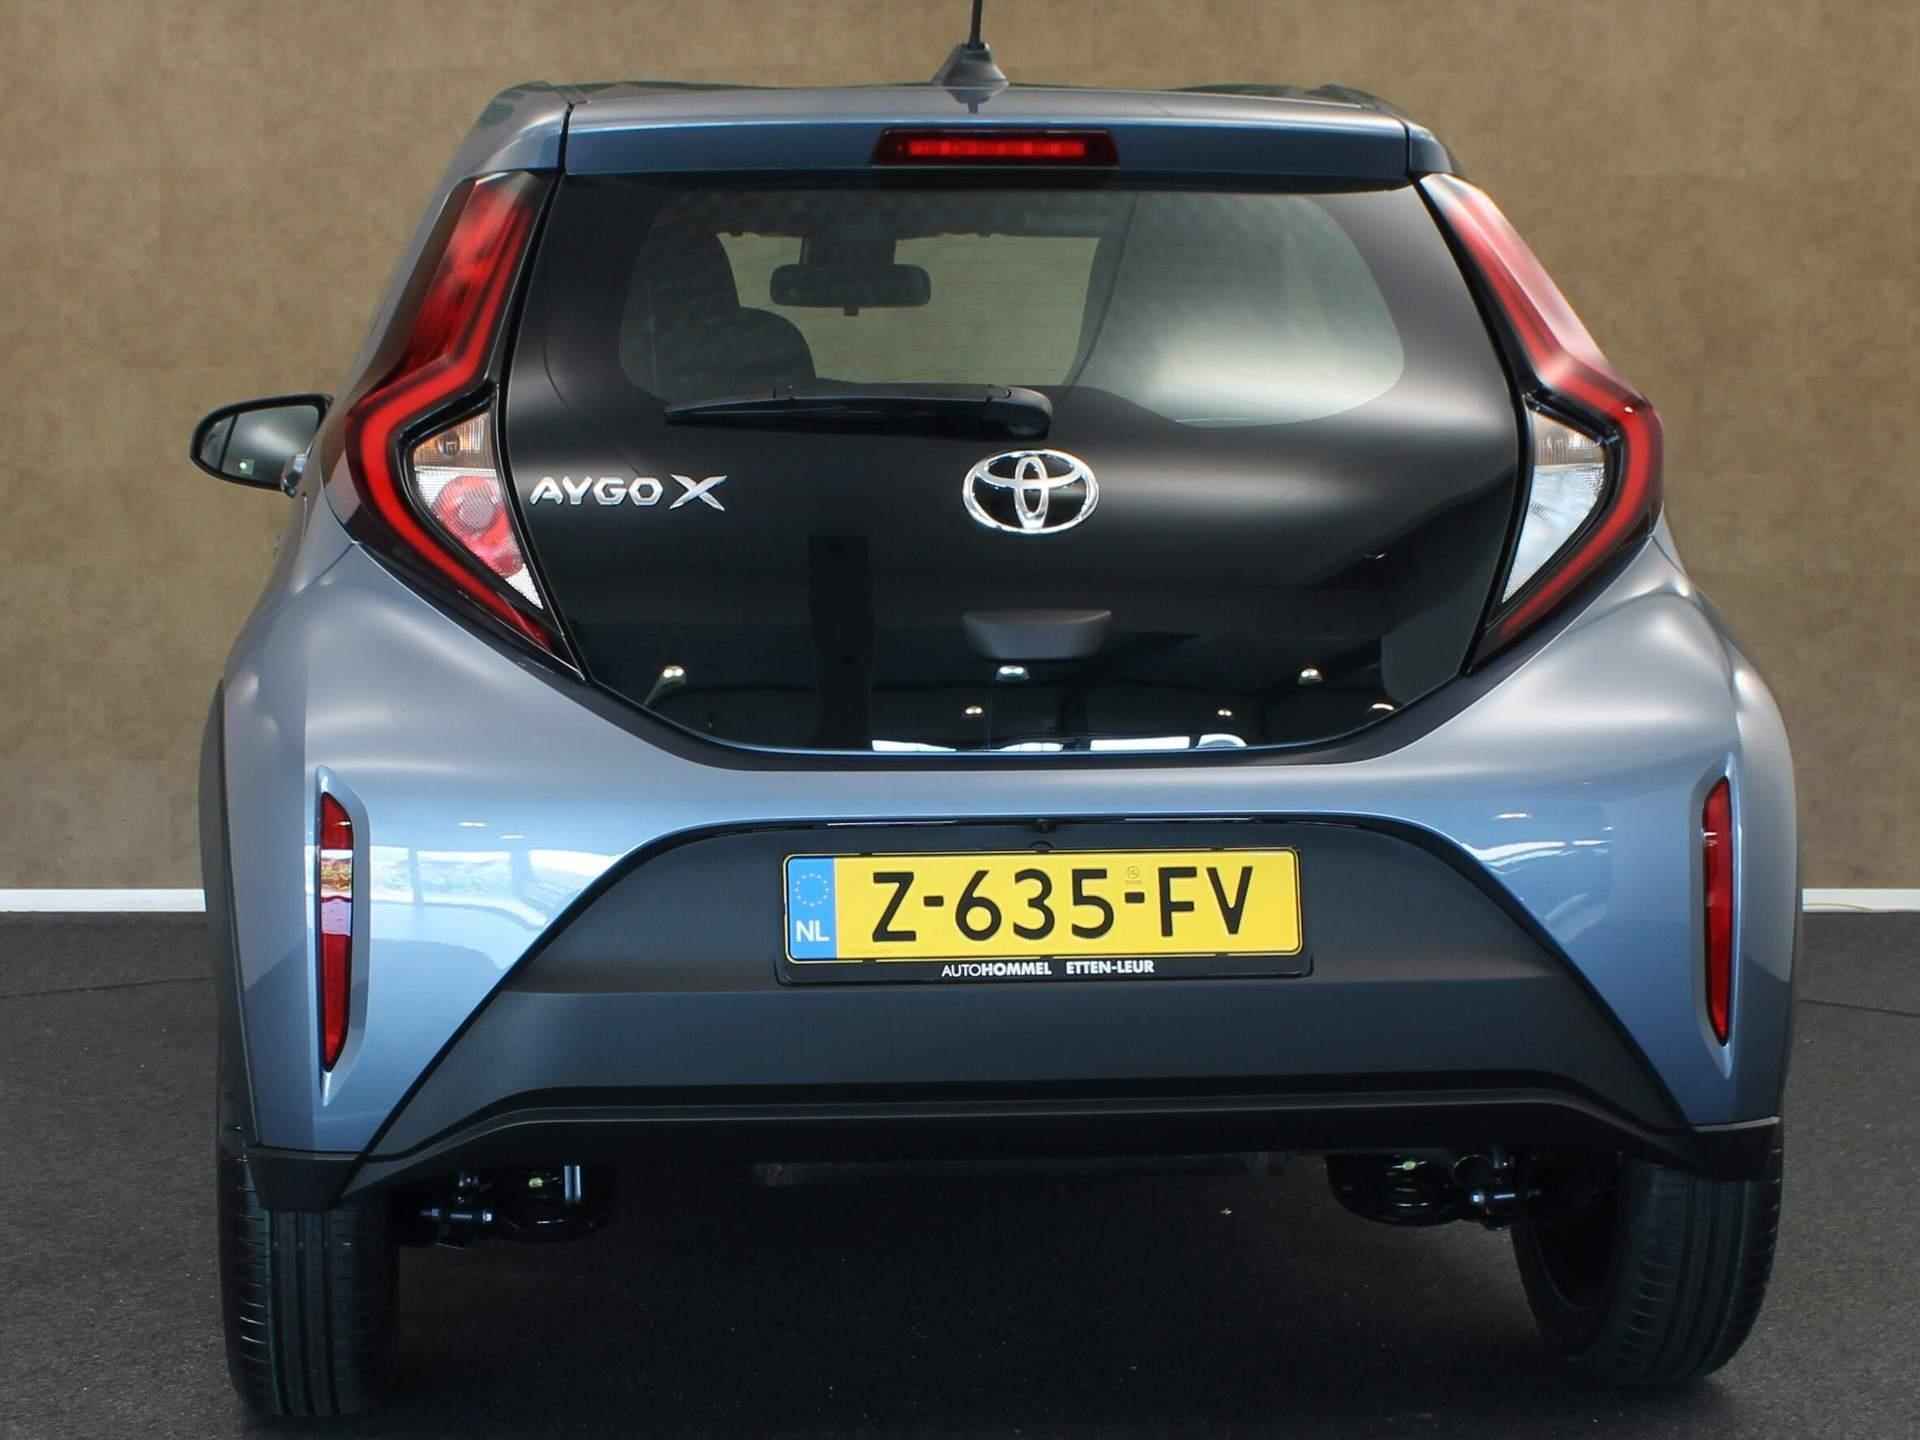 Toyota Aygo X 1.0 VVT-i S-CVT play DIRECT UIT VOORRAAD LEVERBAAR! - AUTOMAAT - APPLE CARPLAY/ANDROID AUTO - AIRCO - 9/28